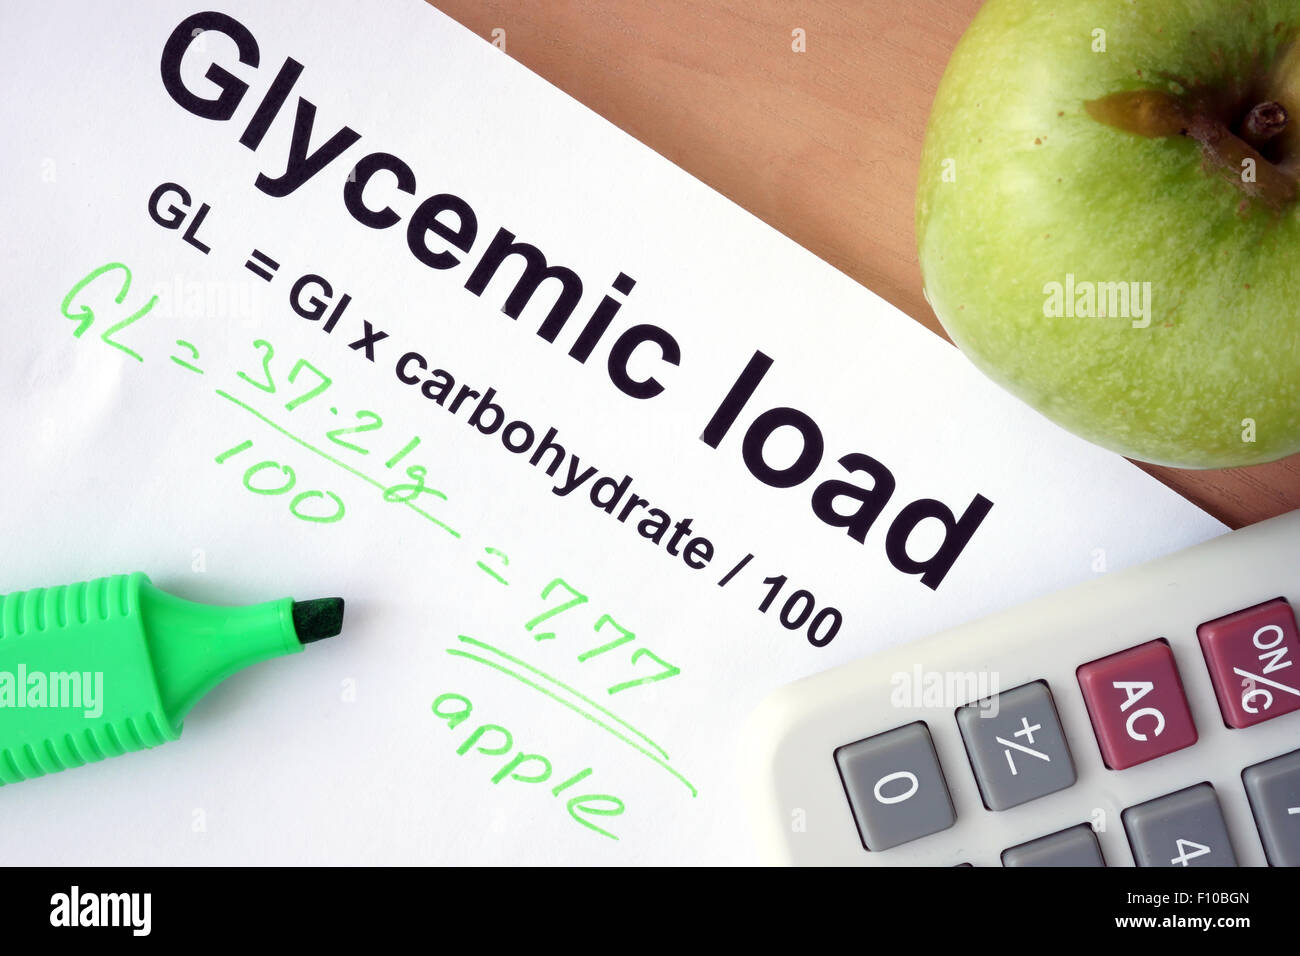 Paper with  glycemic load formula. Stock Photo